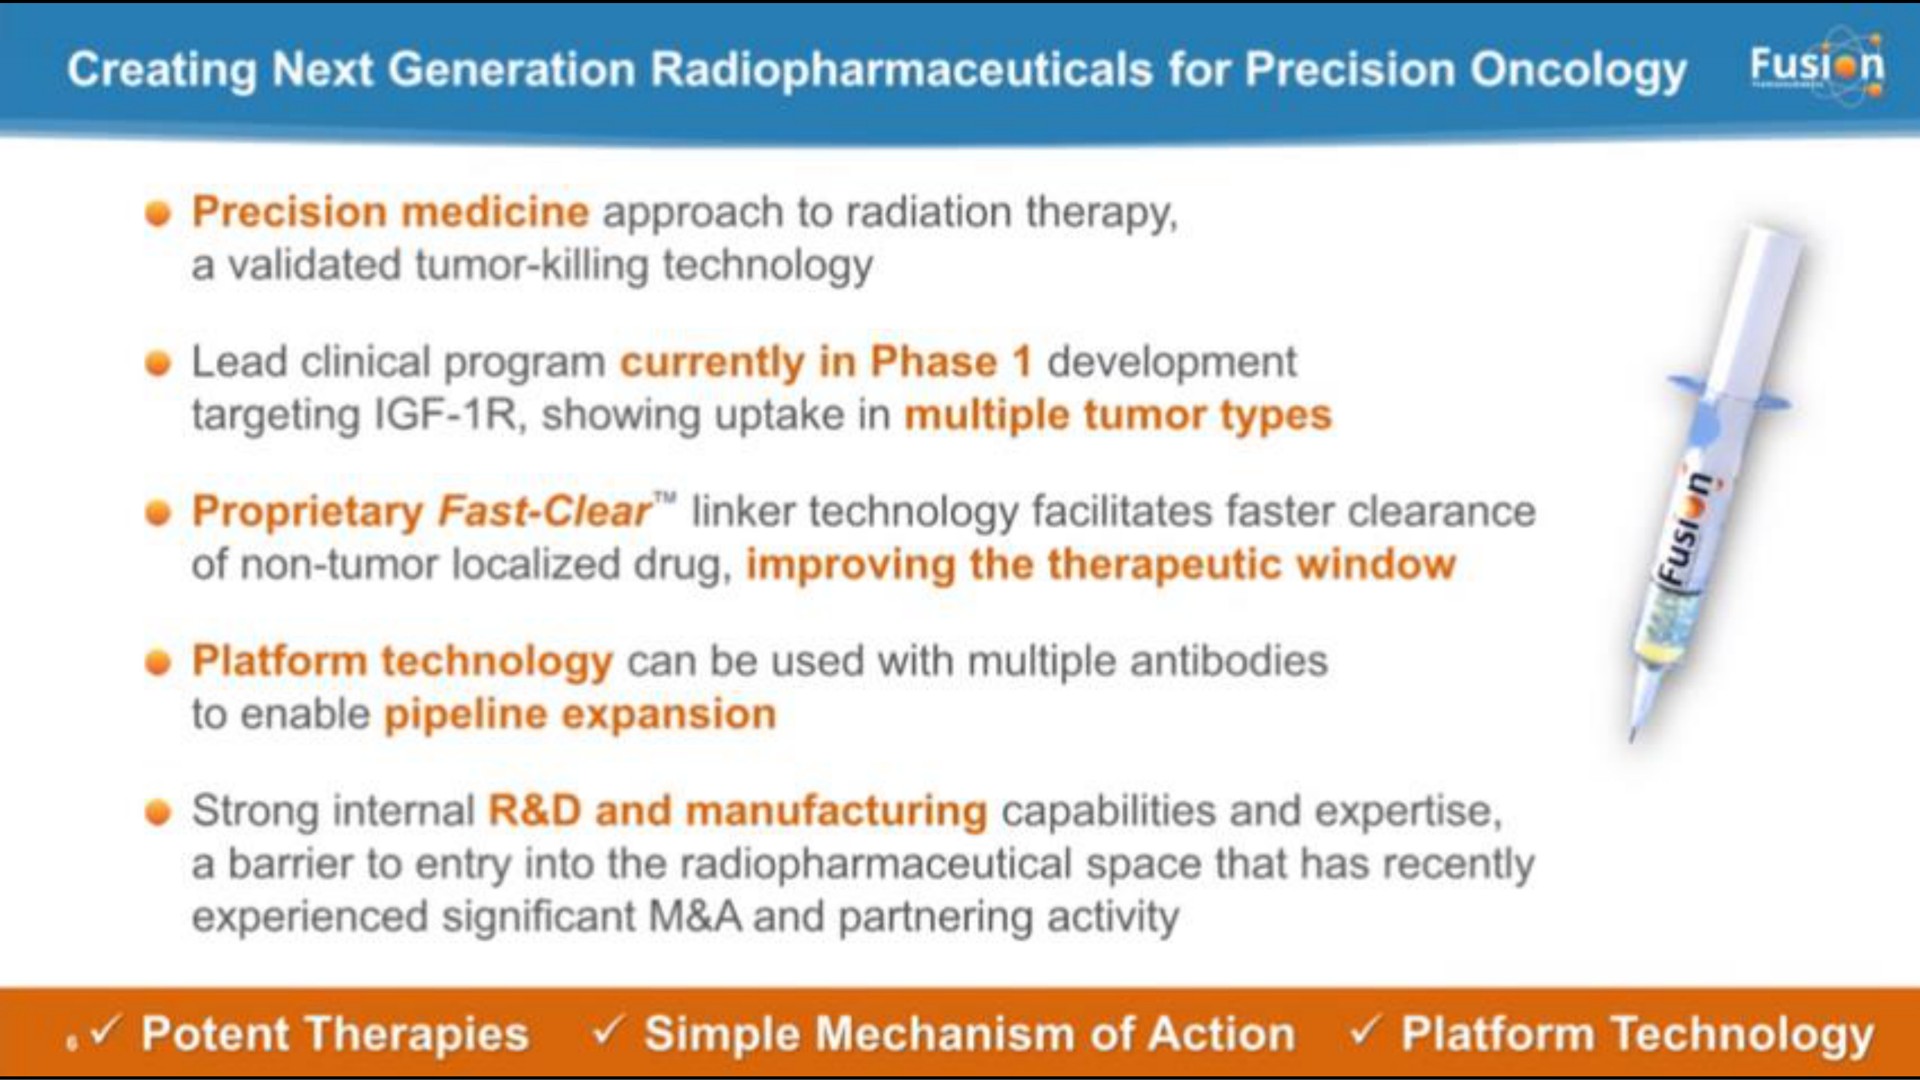 creating next generation for precision oncology potent therapies simple mechanism of action platform technology | Fusion Pharmaceuticals